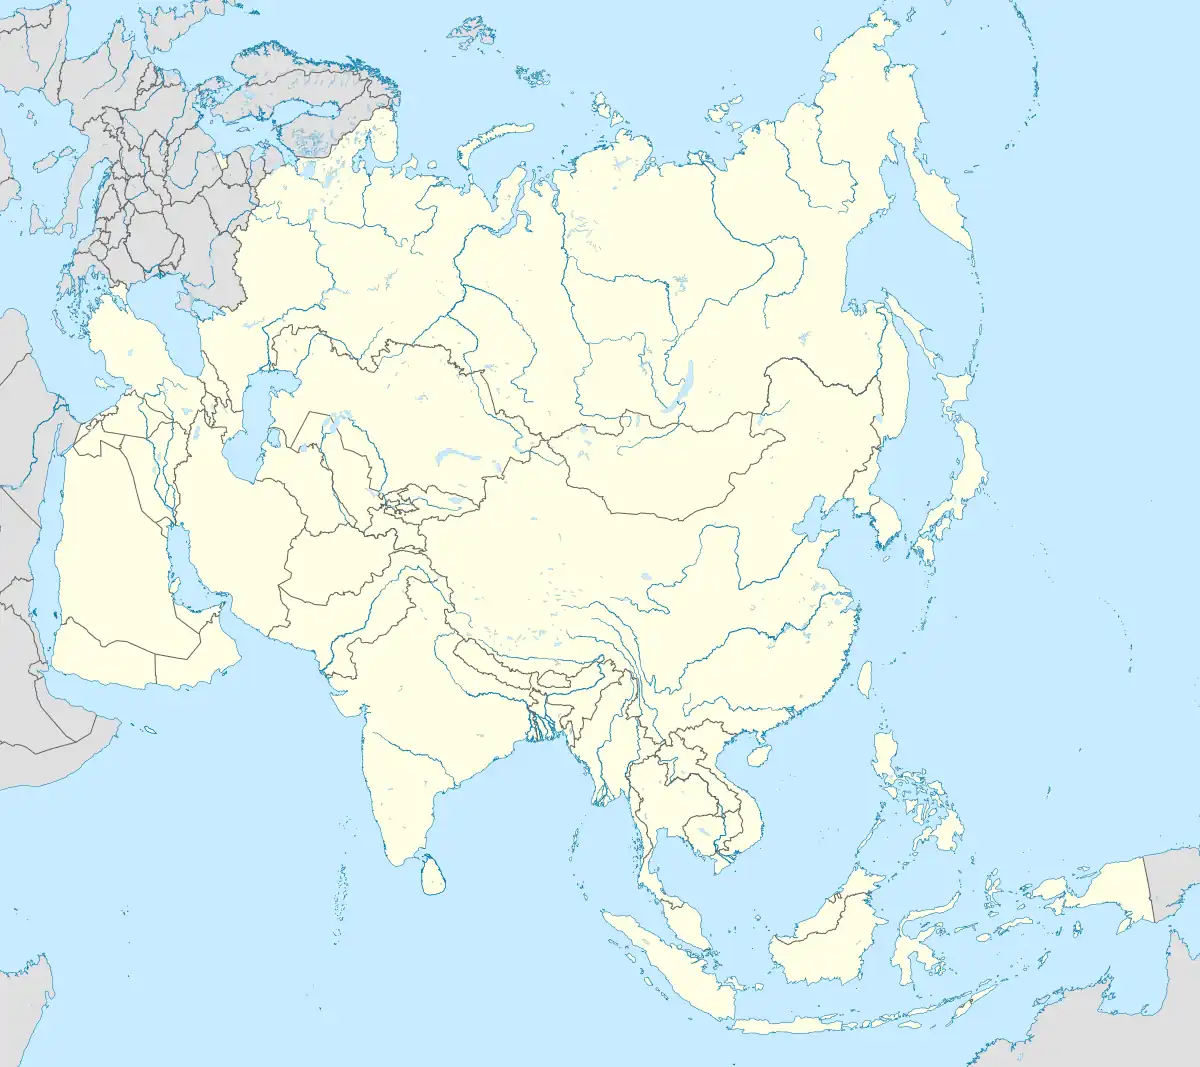 Astana is located in Asia